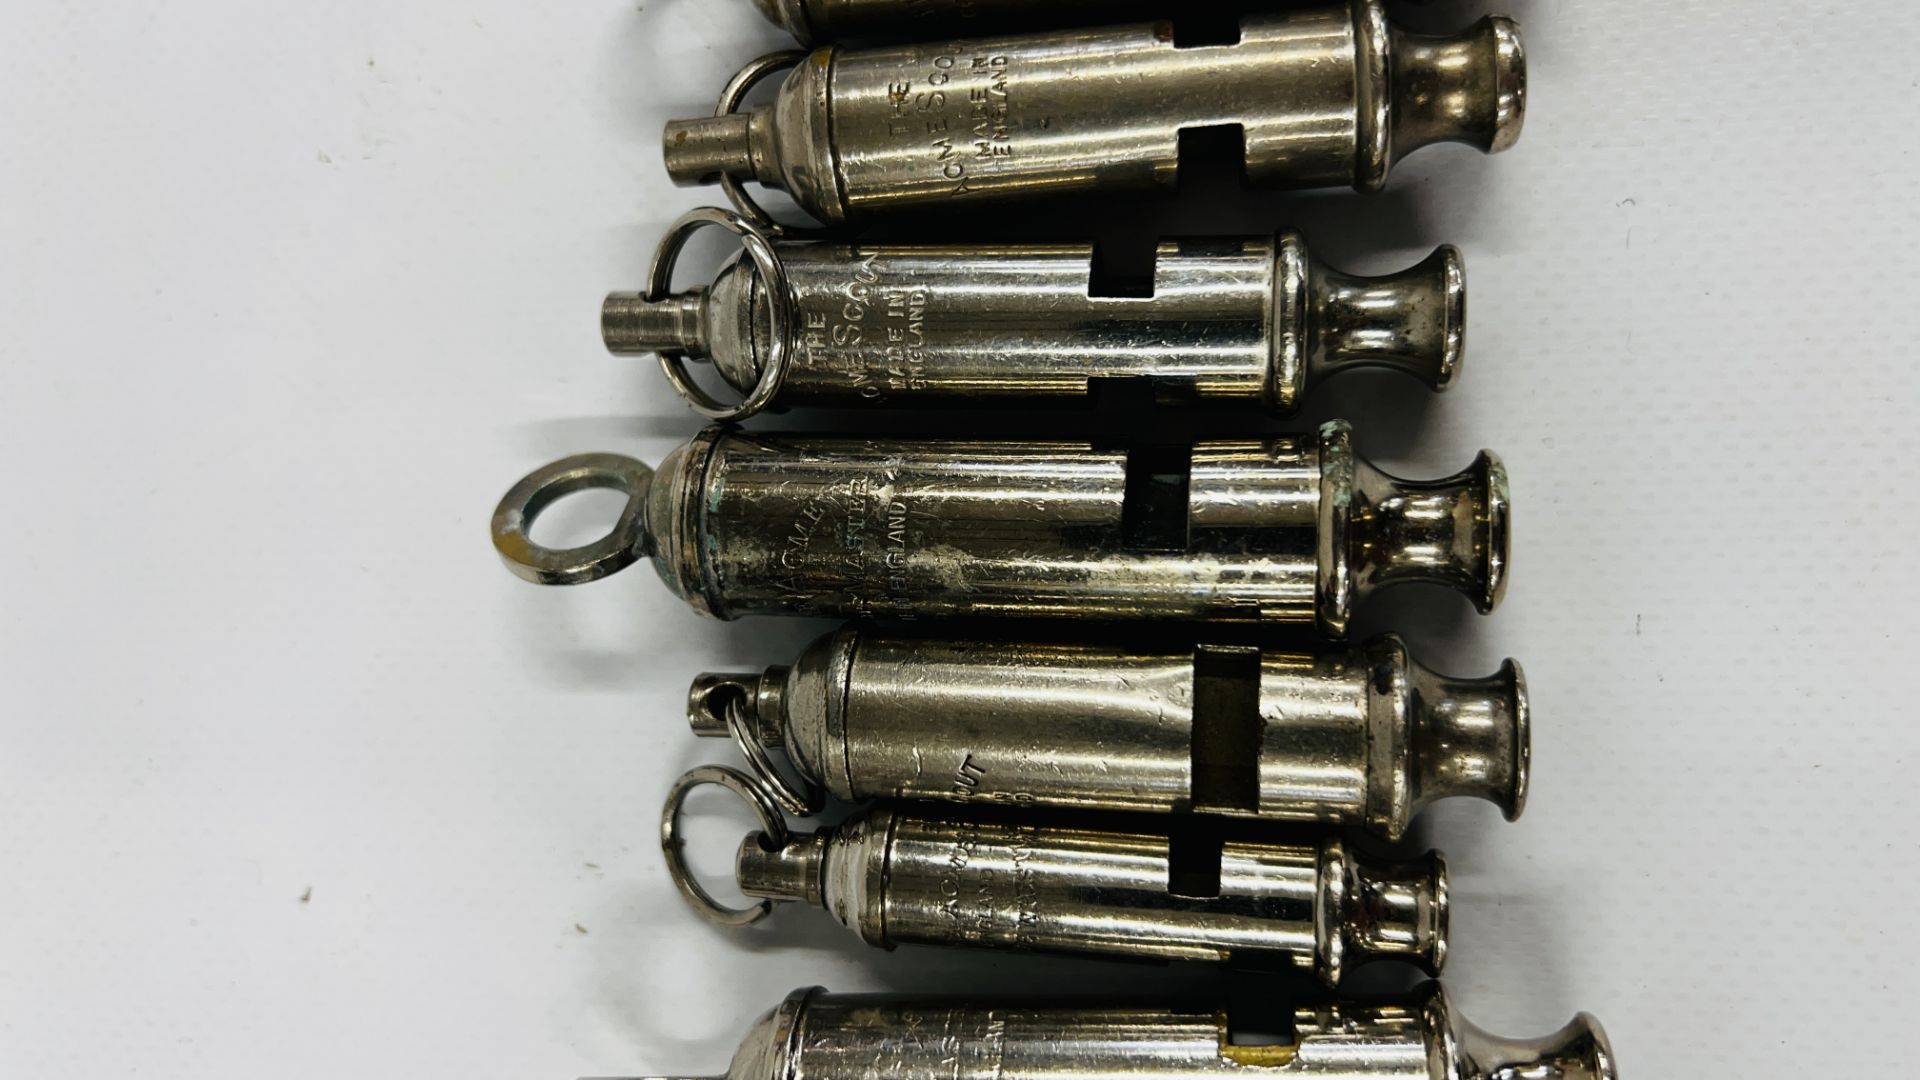 A COLLECTION OF 13 ASSORTED VINTAGE "ACME" WHISTLES, BOY SCOUTS & GIRL GUIDES. - Image 3 of 5